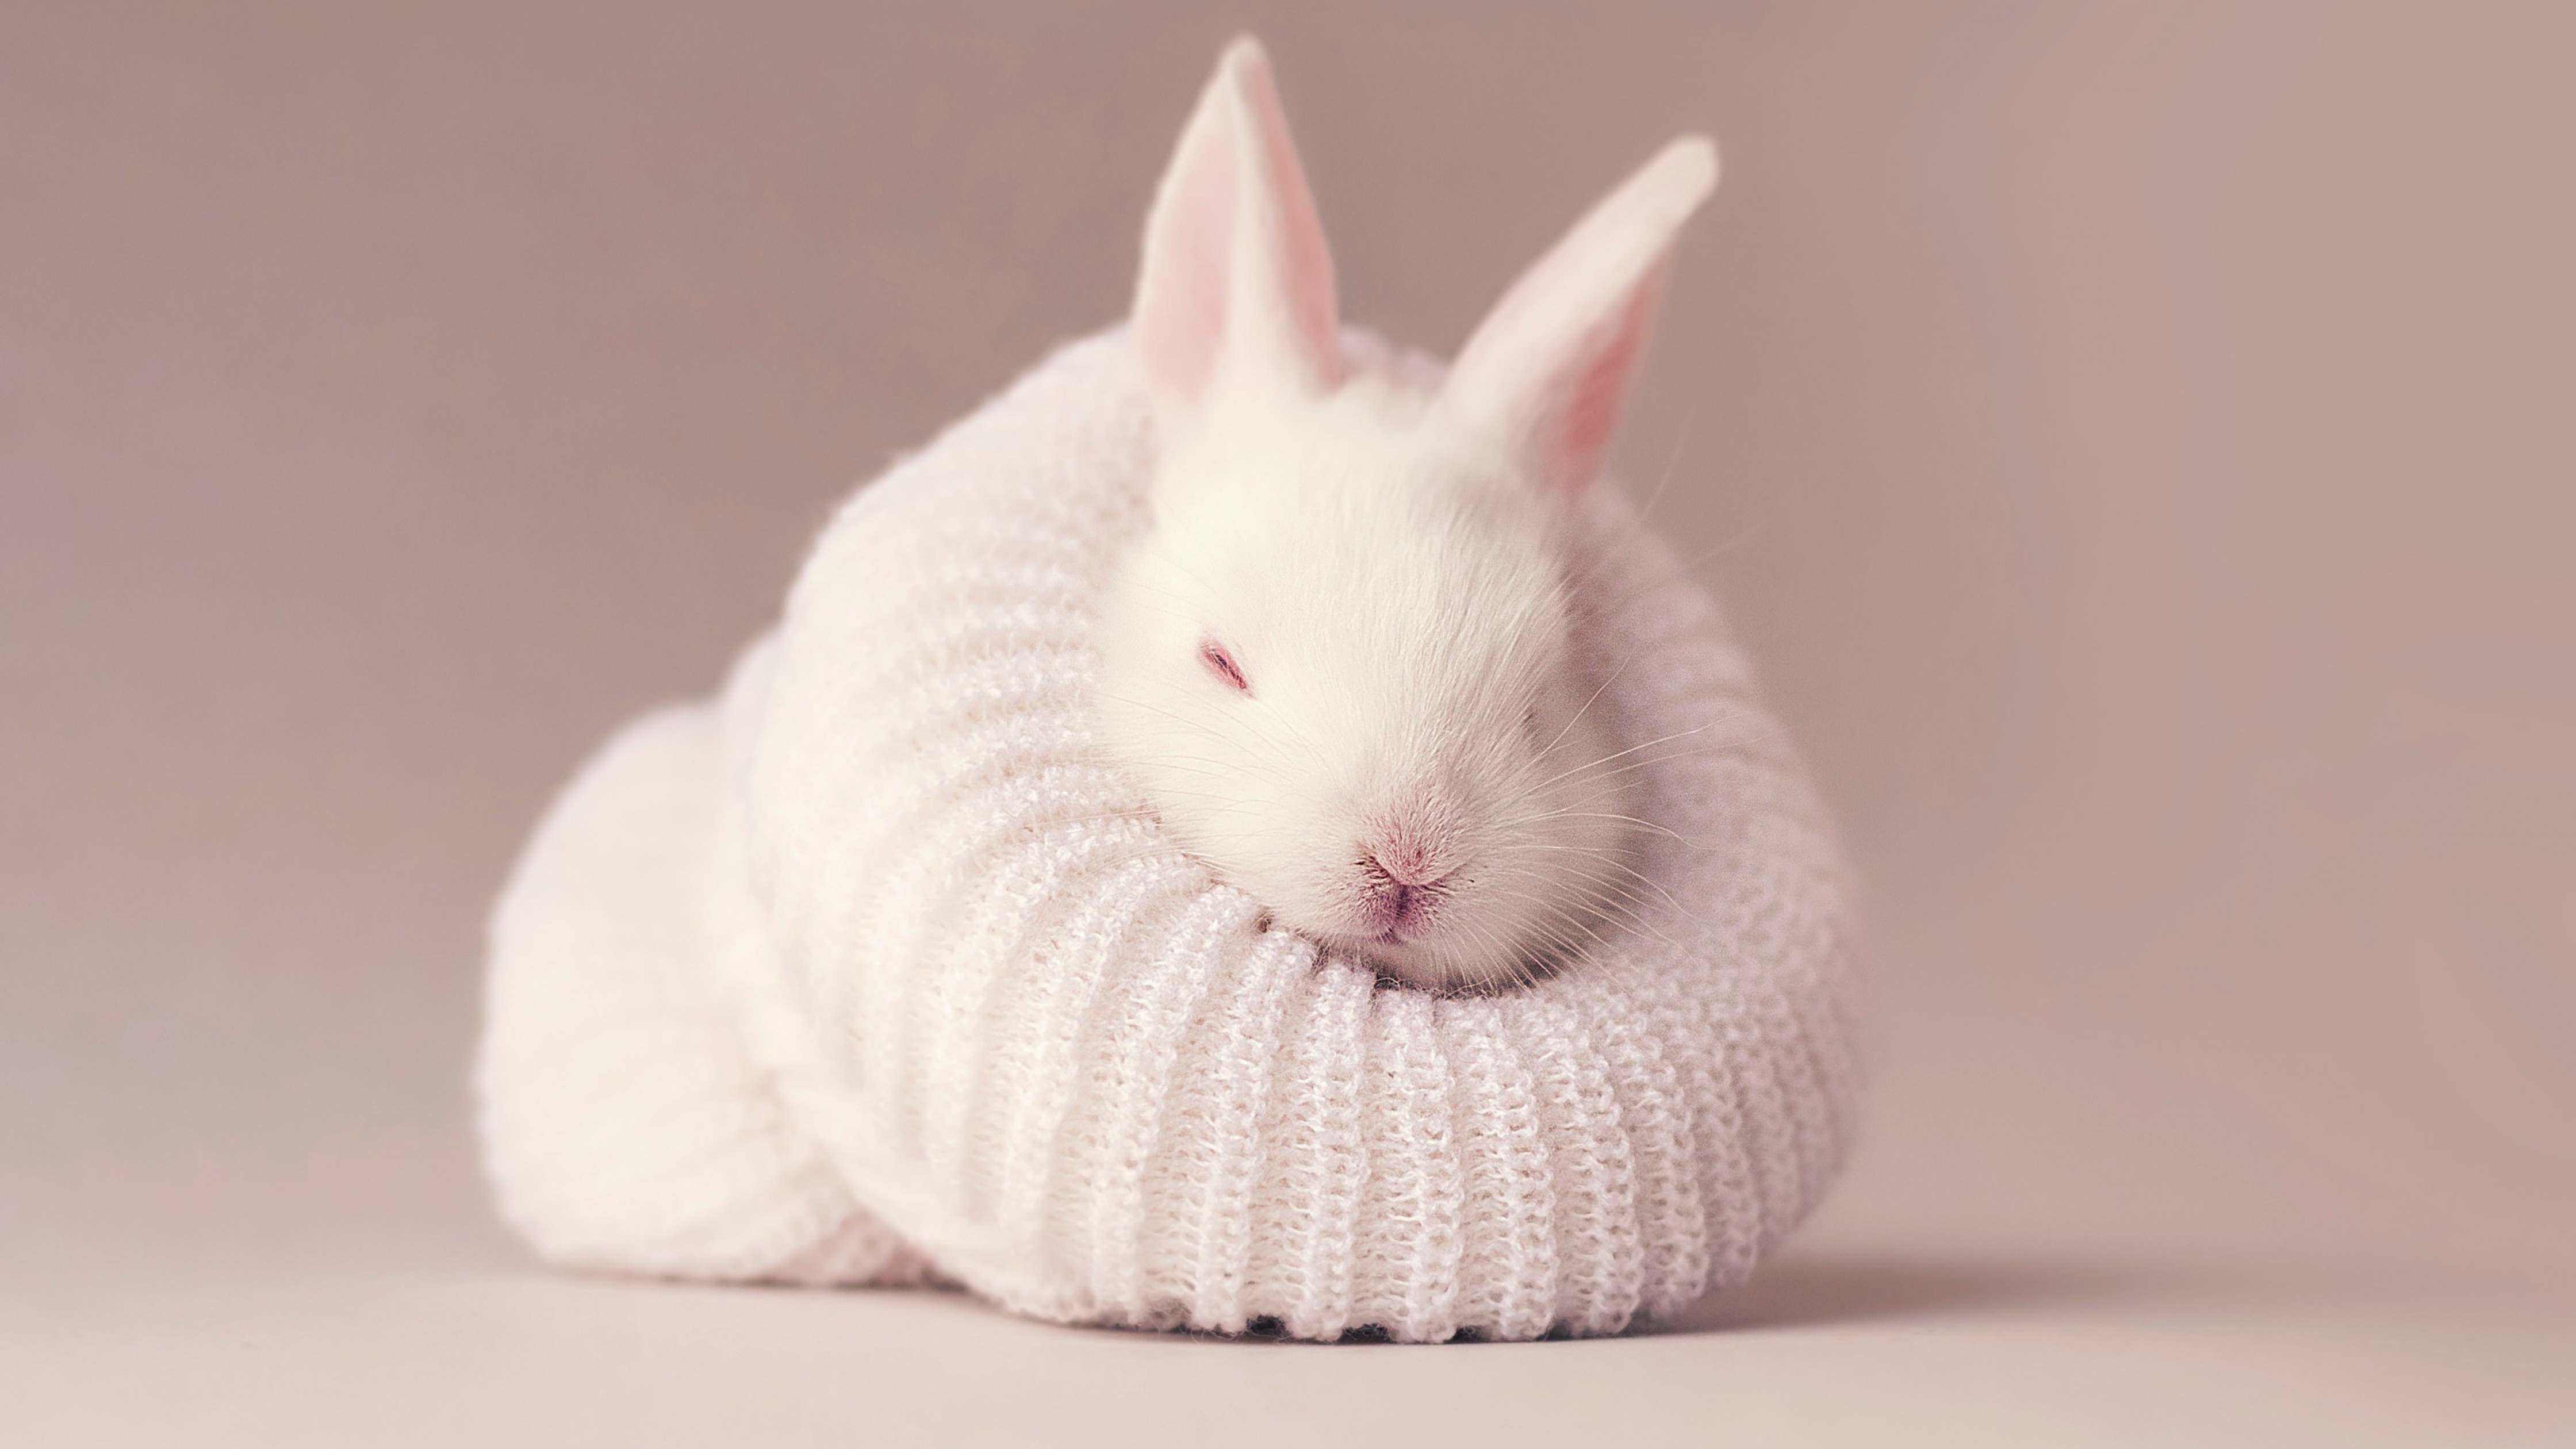 15 Greatest wallpaper aesthetic rabbit You Can Use It Free Of Charge ...